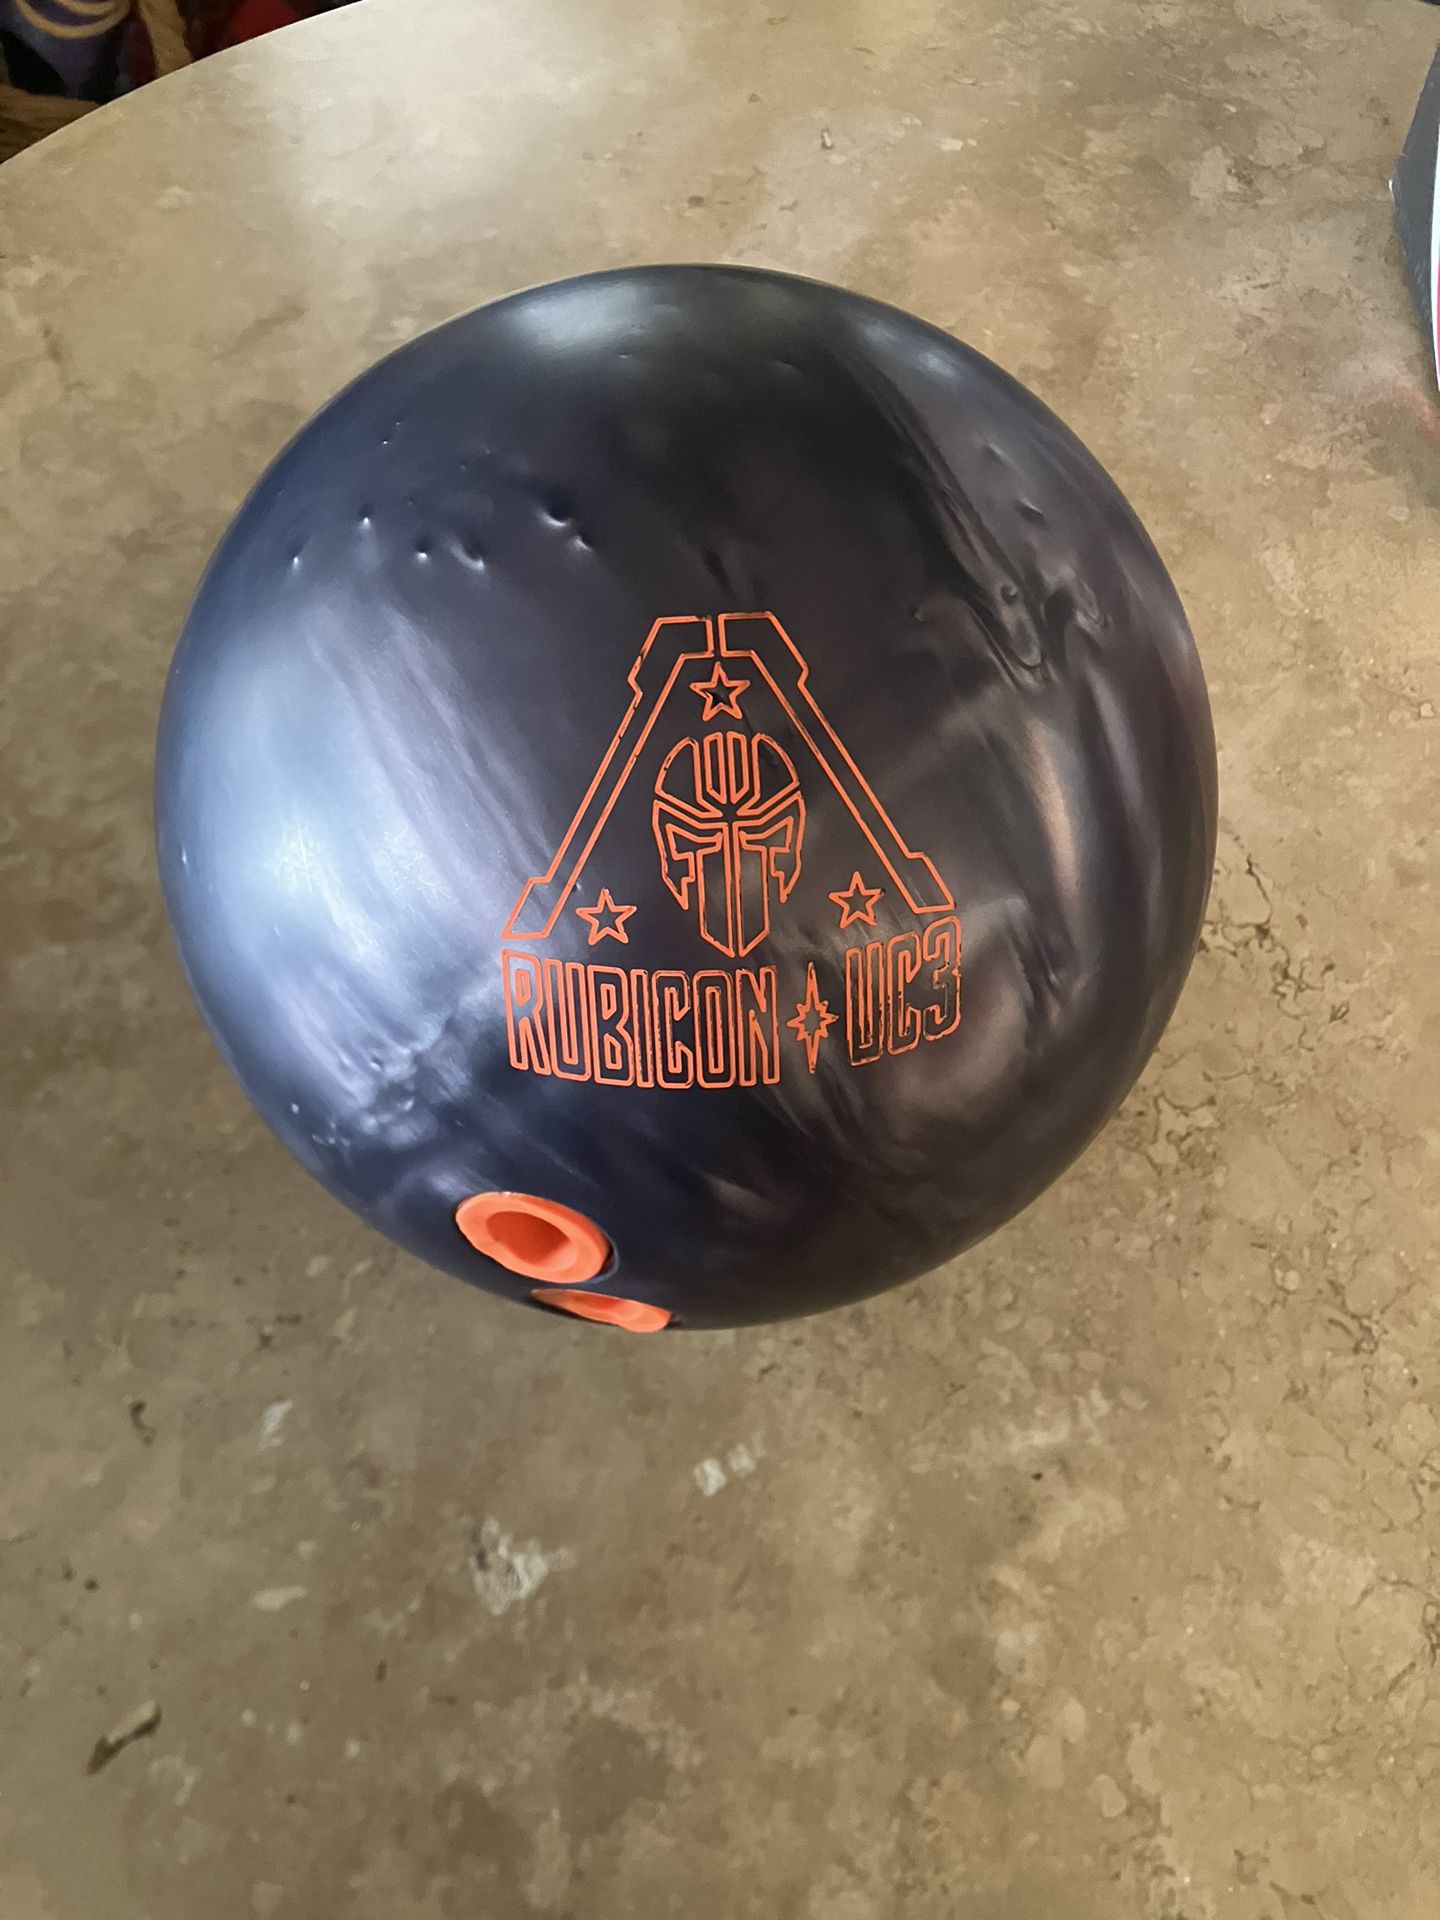 Roto Grip Rubicon UC3 (15 Lb Bowling Ball) for Sale in Irwindale